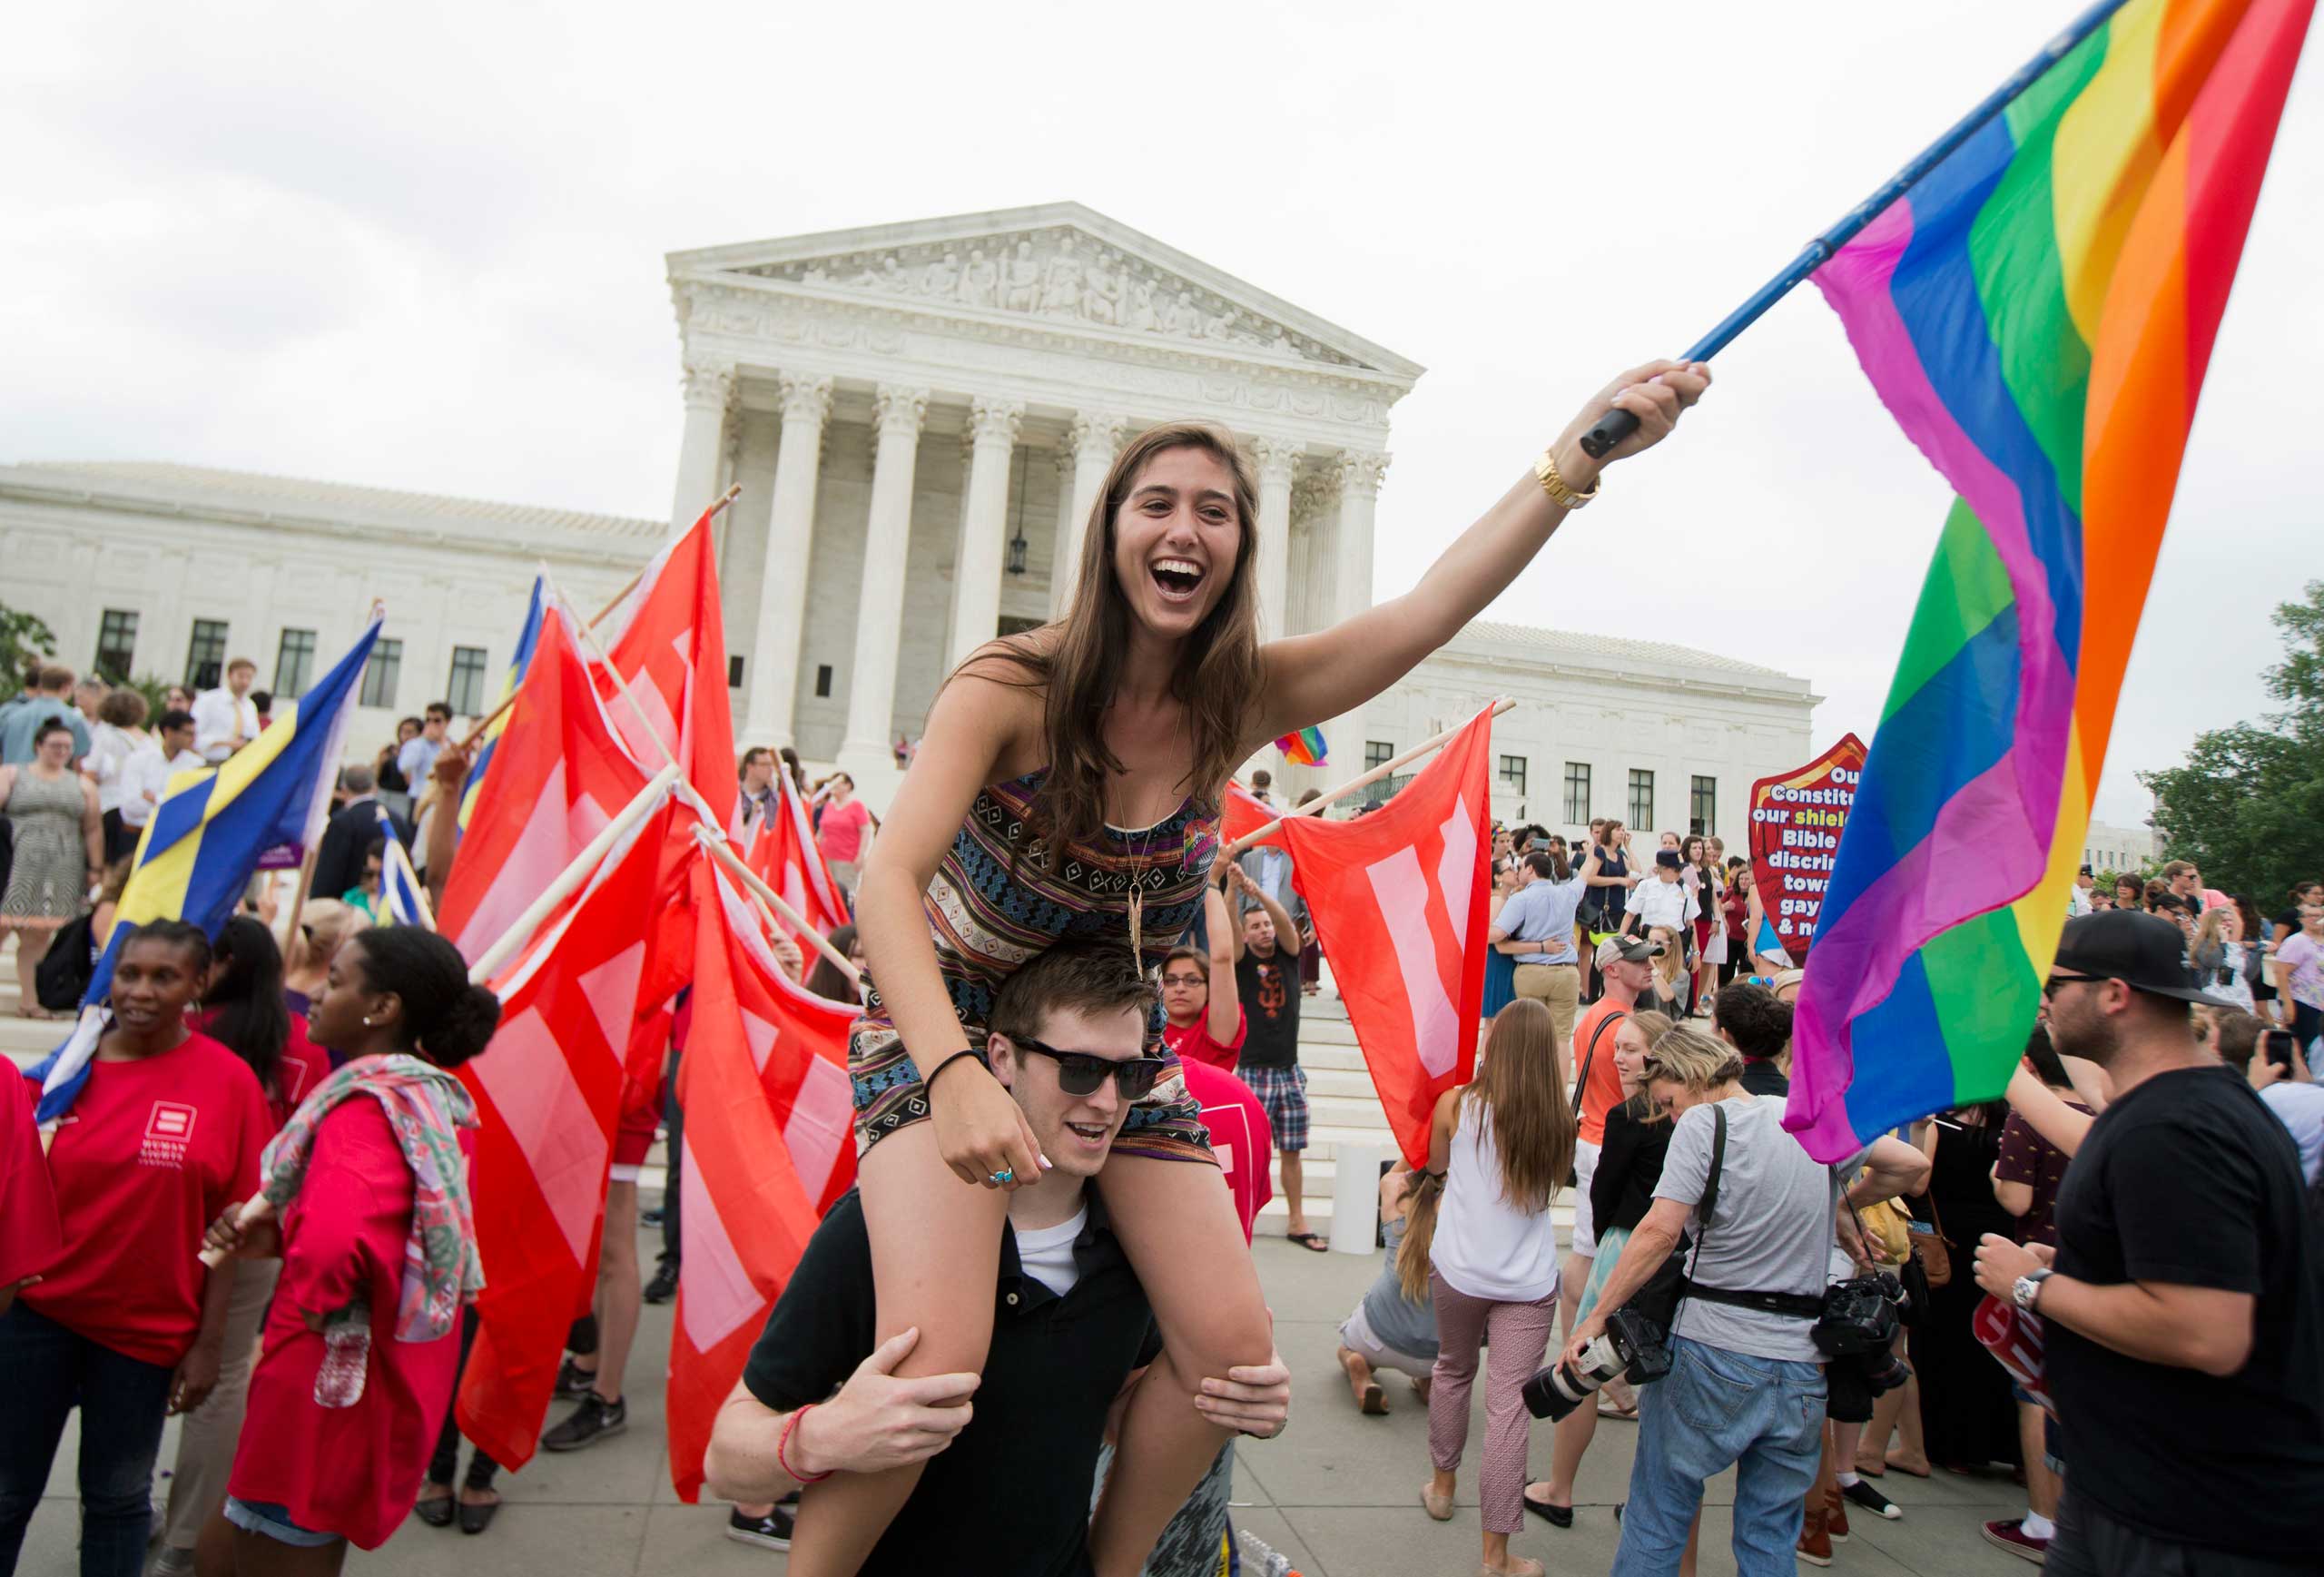 Supporters of same-sex marriage celebrate outside of the Supreme Court in Washington, on June 26, 2015.